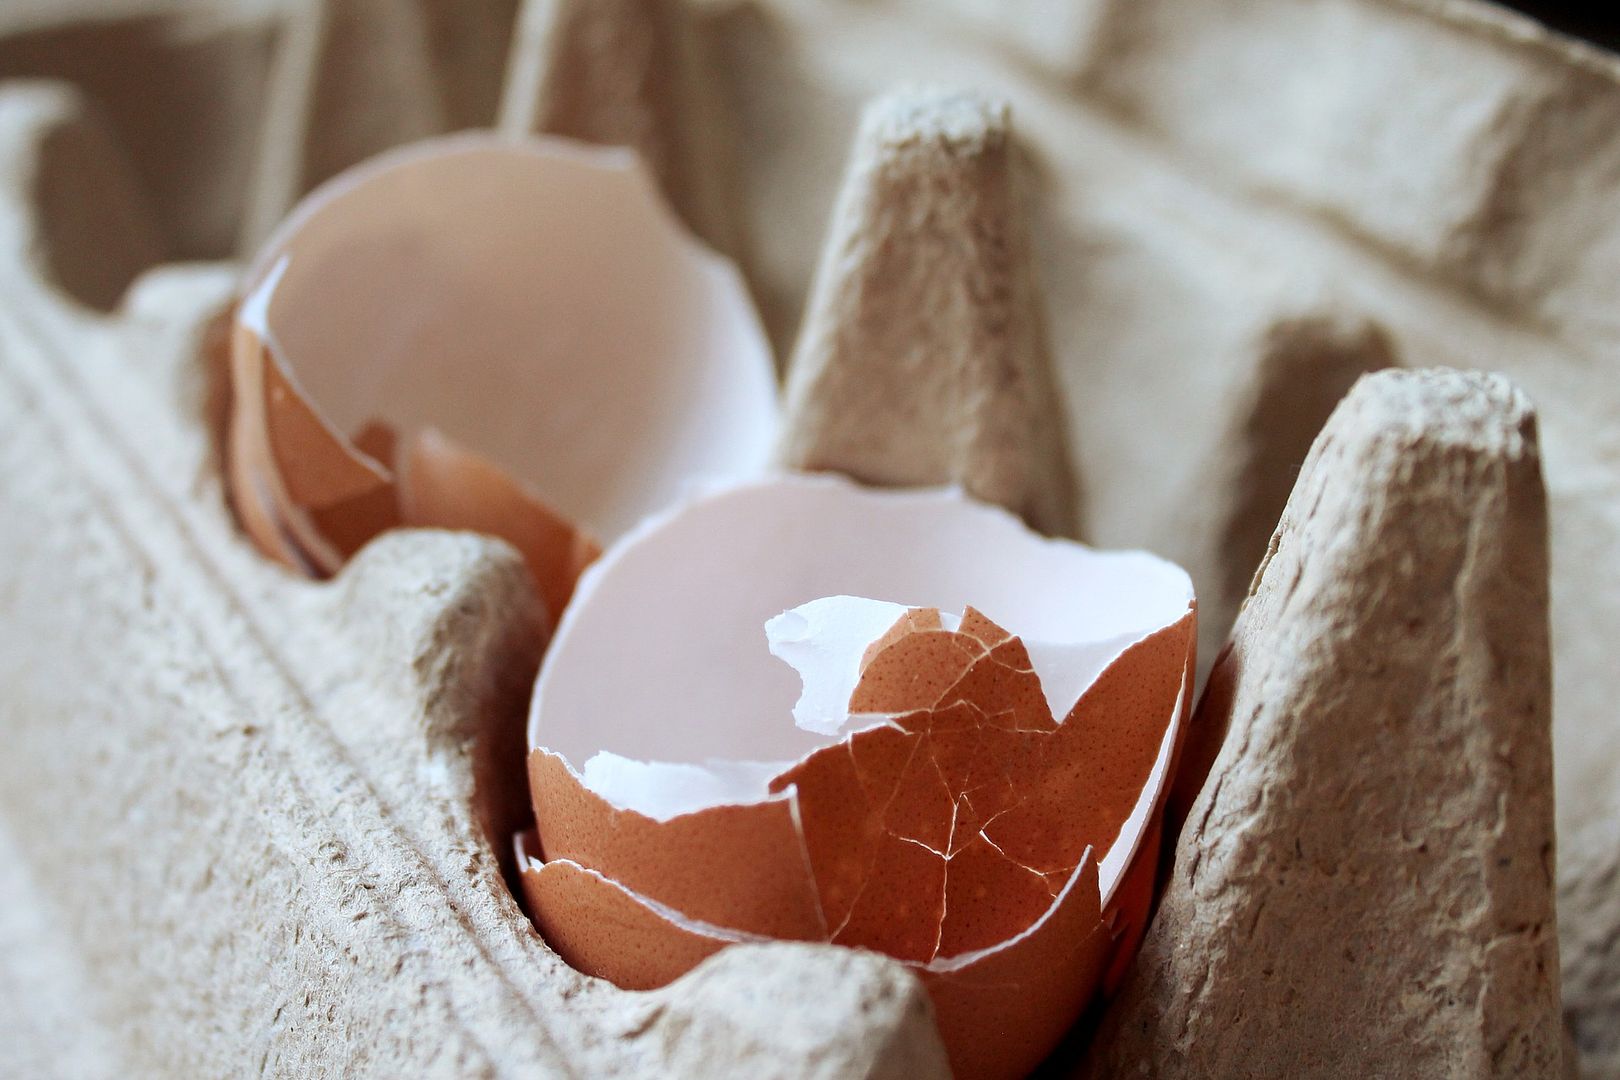 calcium-rich foods egg shell